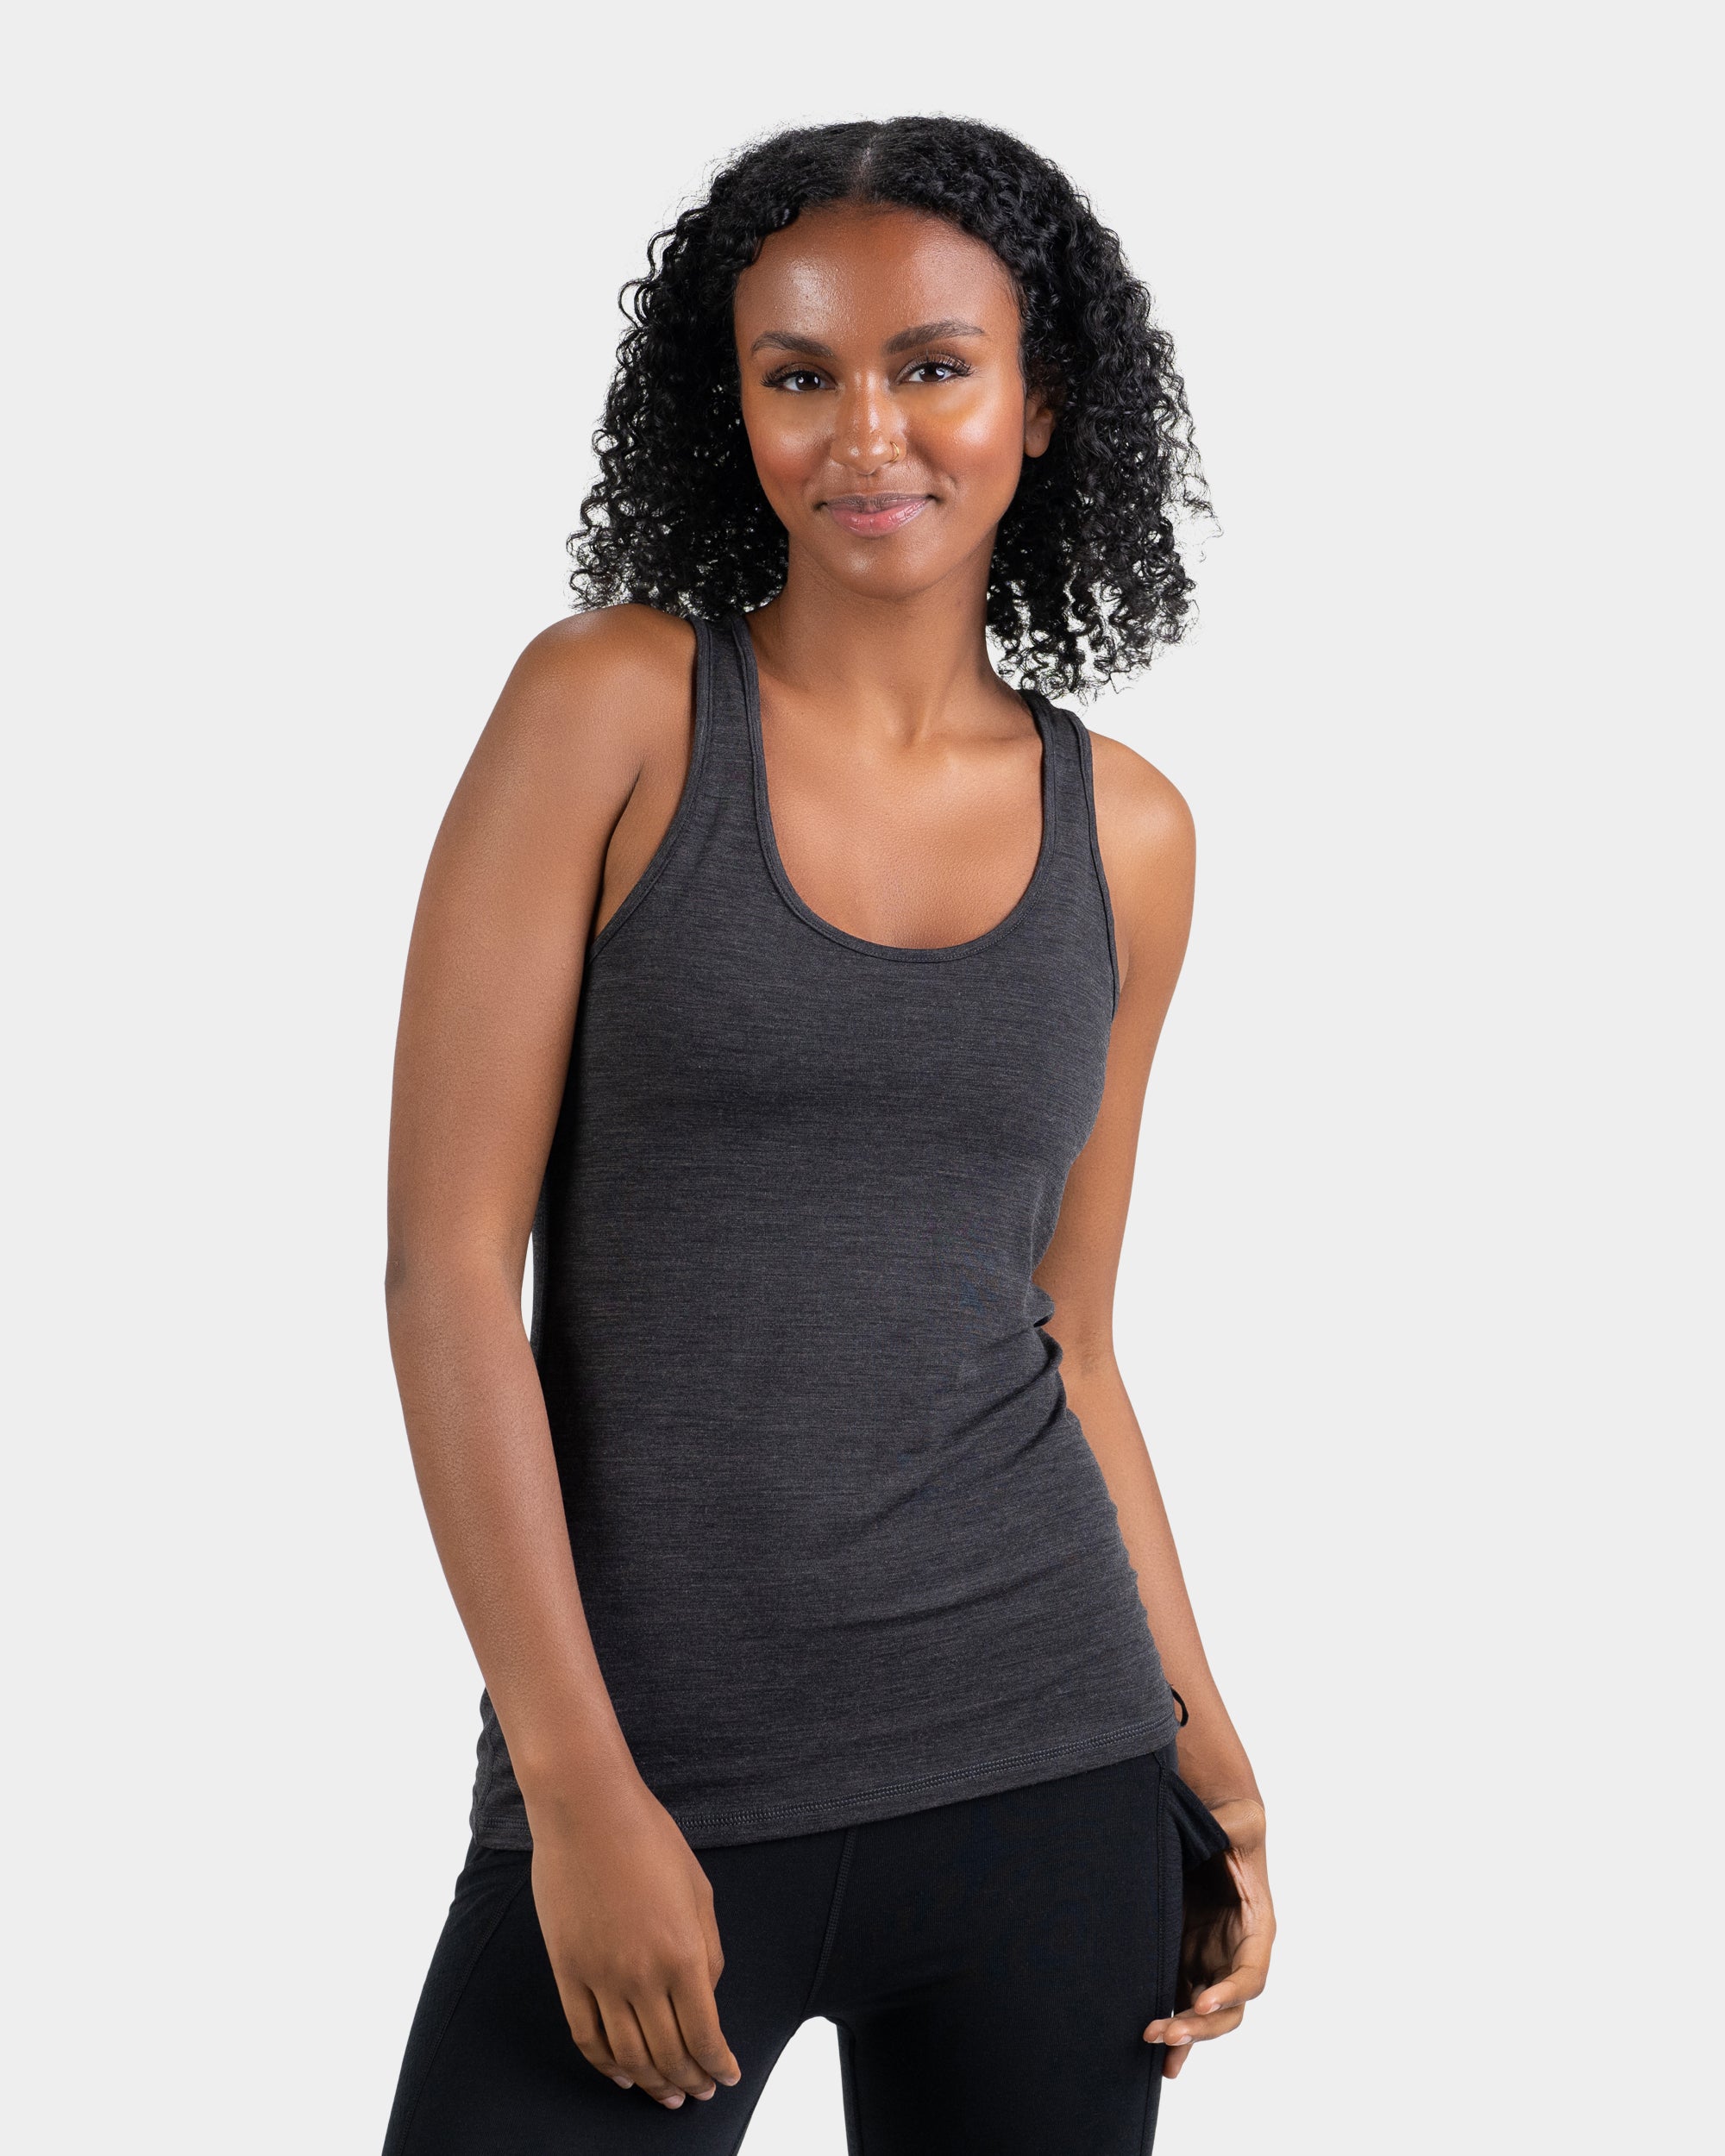 Classic Tank, Fitted Cotton Tank Top For Women